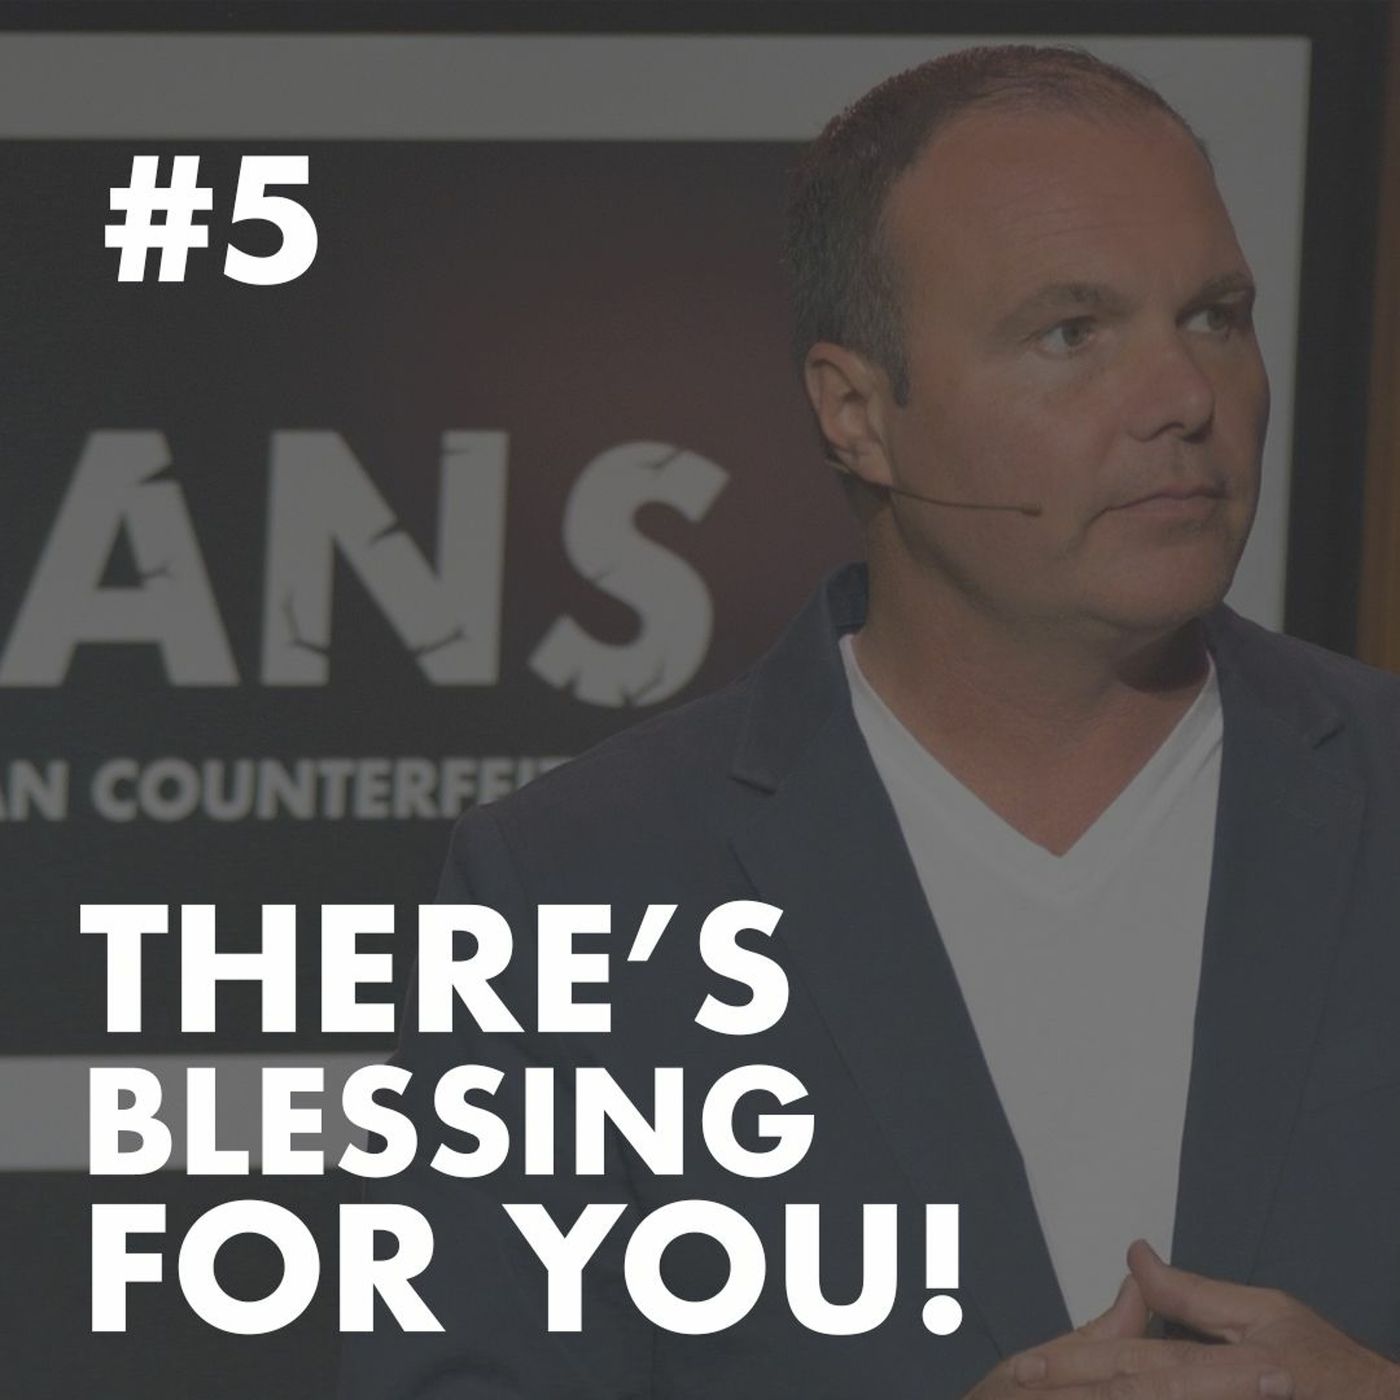 Galatians #5 - There’s Blessing for YOU!